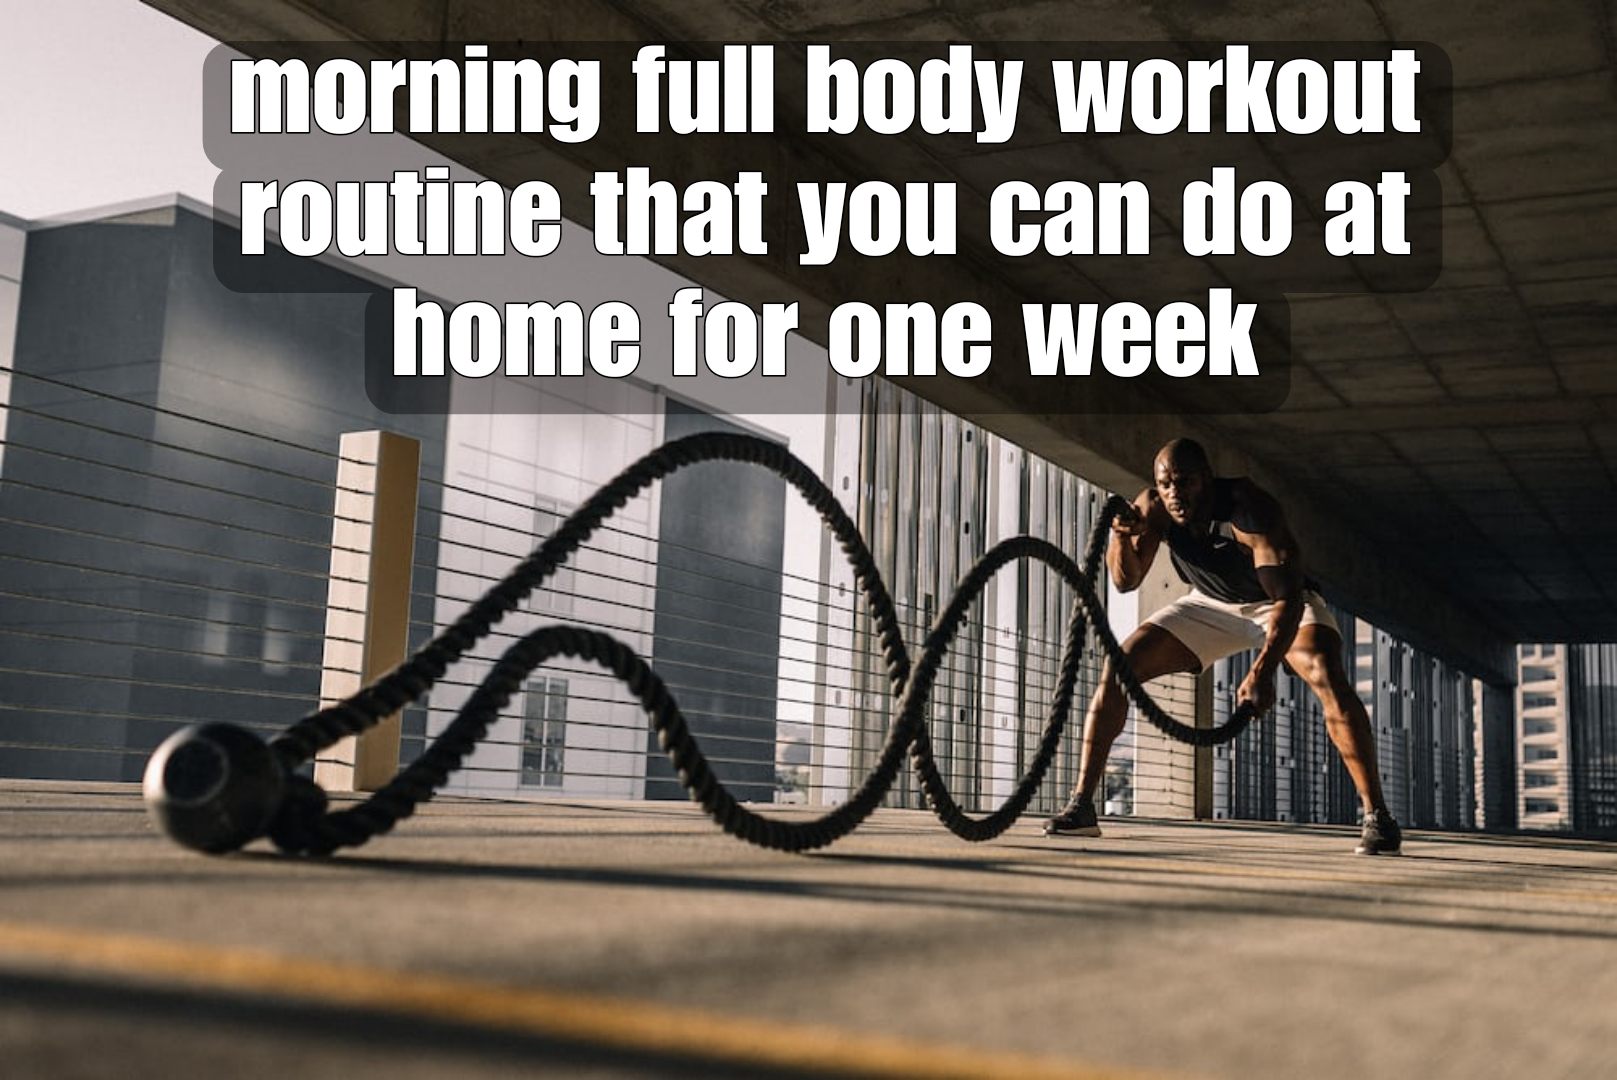 morning full body workout routine that you can do at home for one week